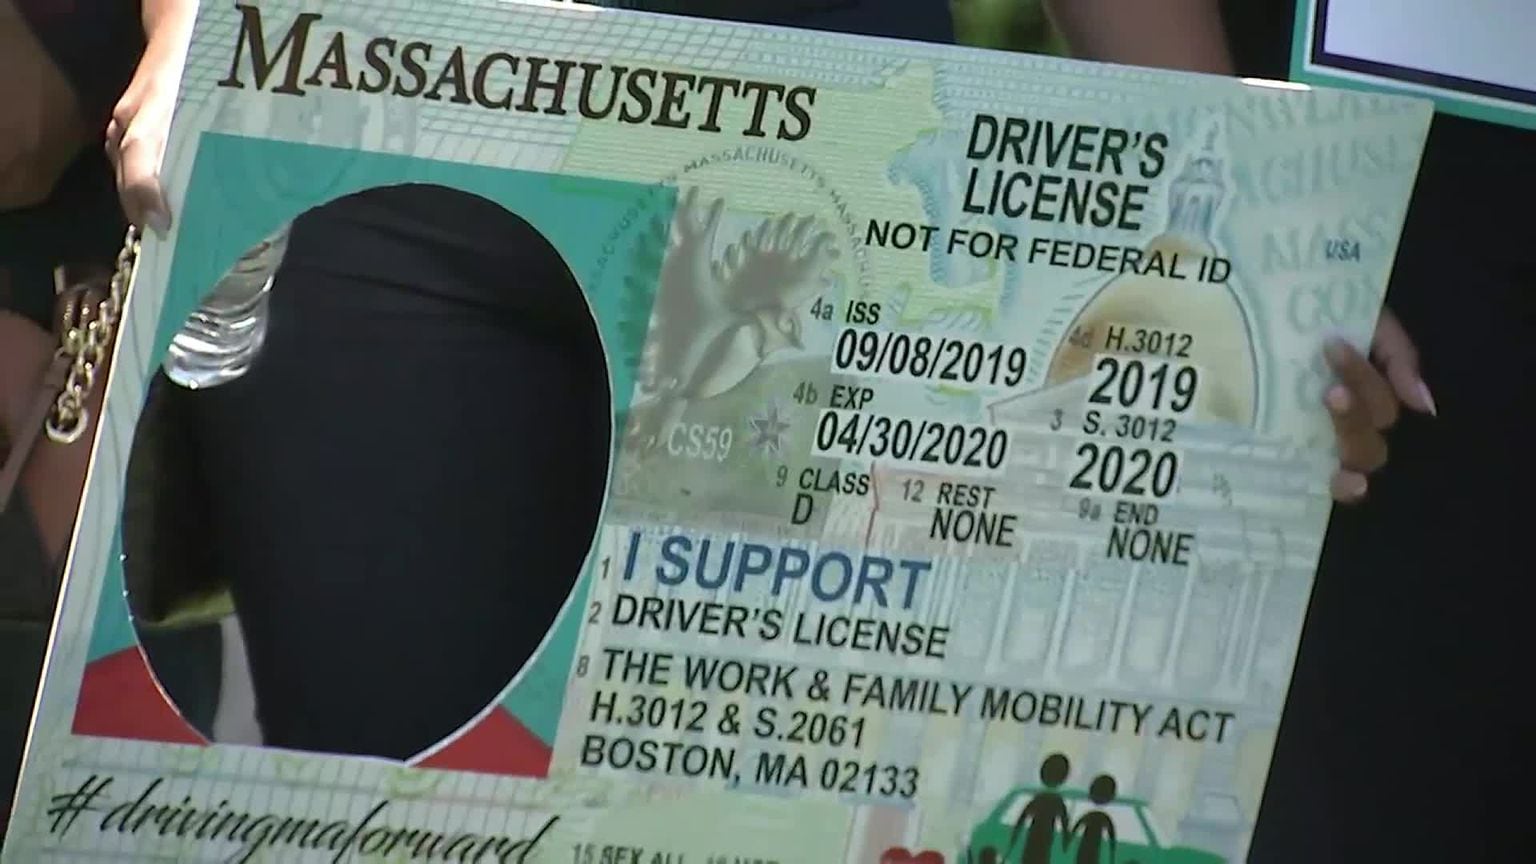 All Immigrants Now Eligible for Standard Driver's License in Massachusetts  - Sampan